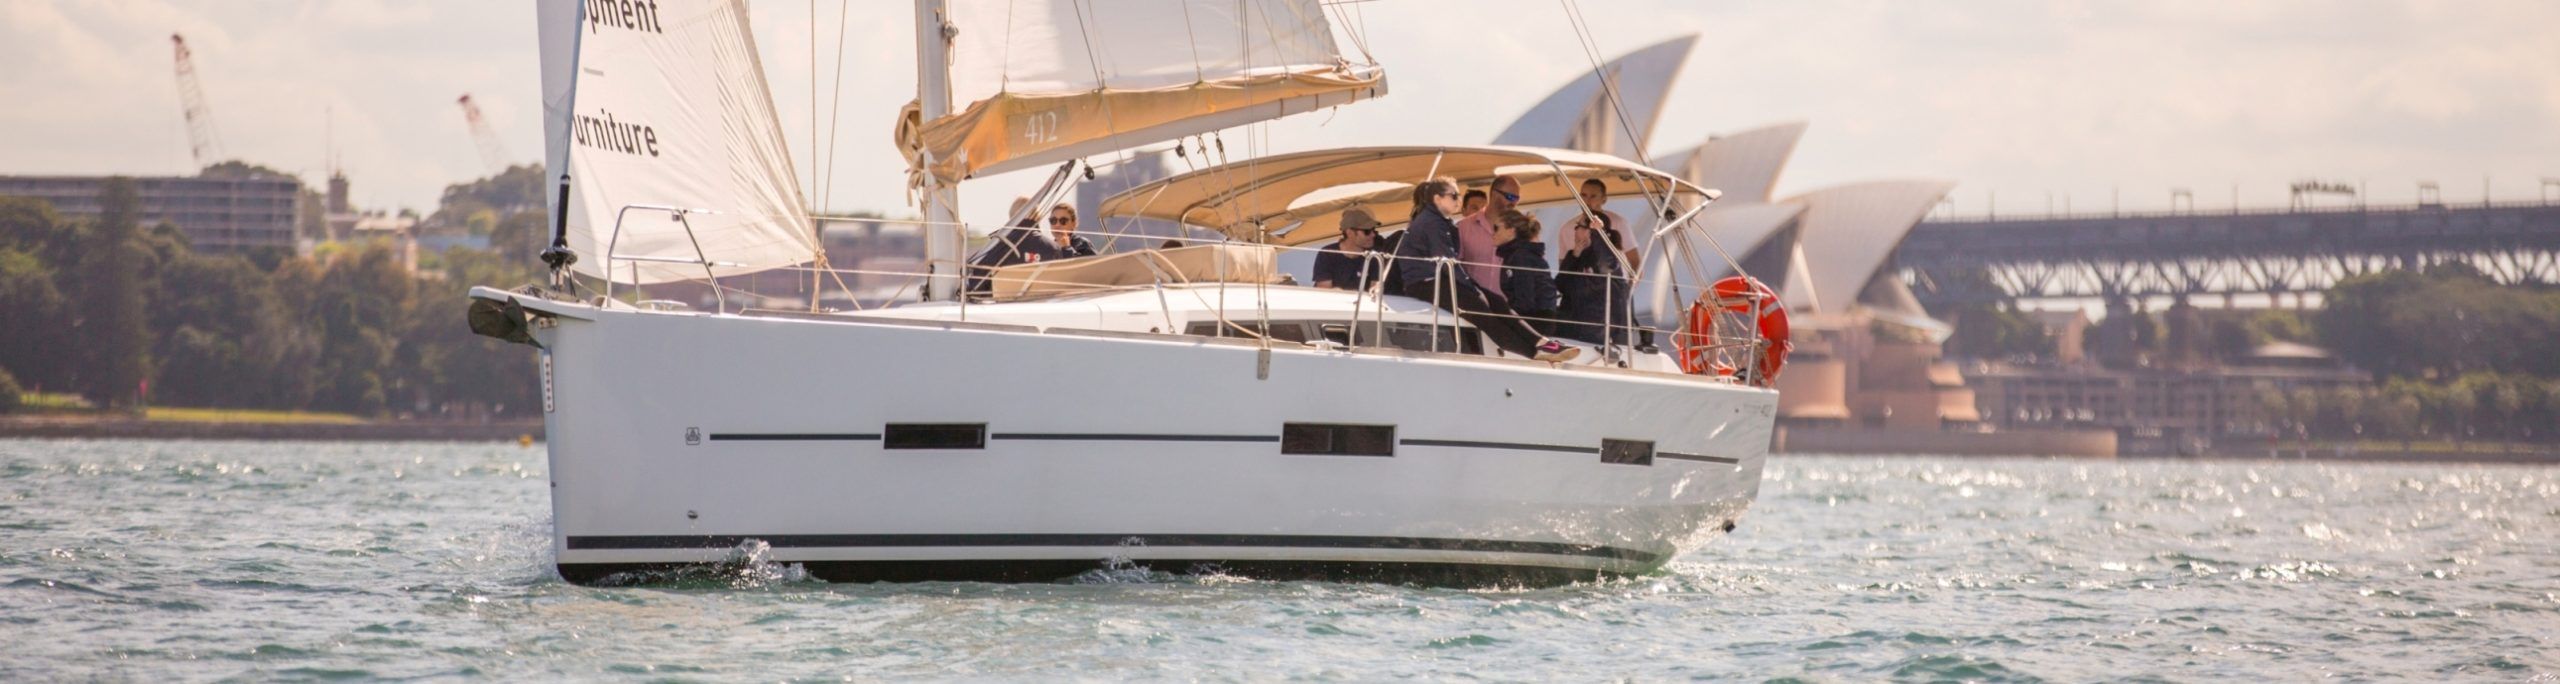 luxury & private yacht charter in Sydney, Darling Harbour with Sydney By Sail